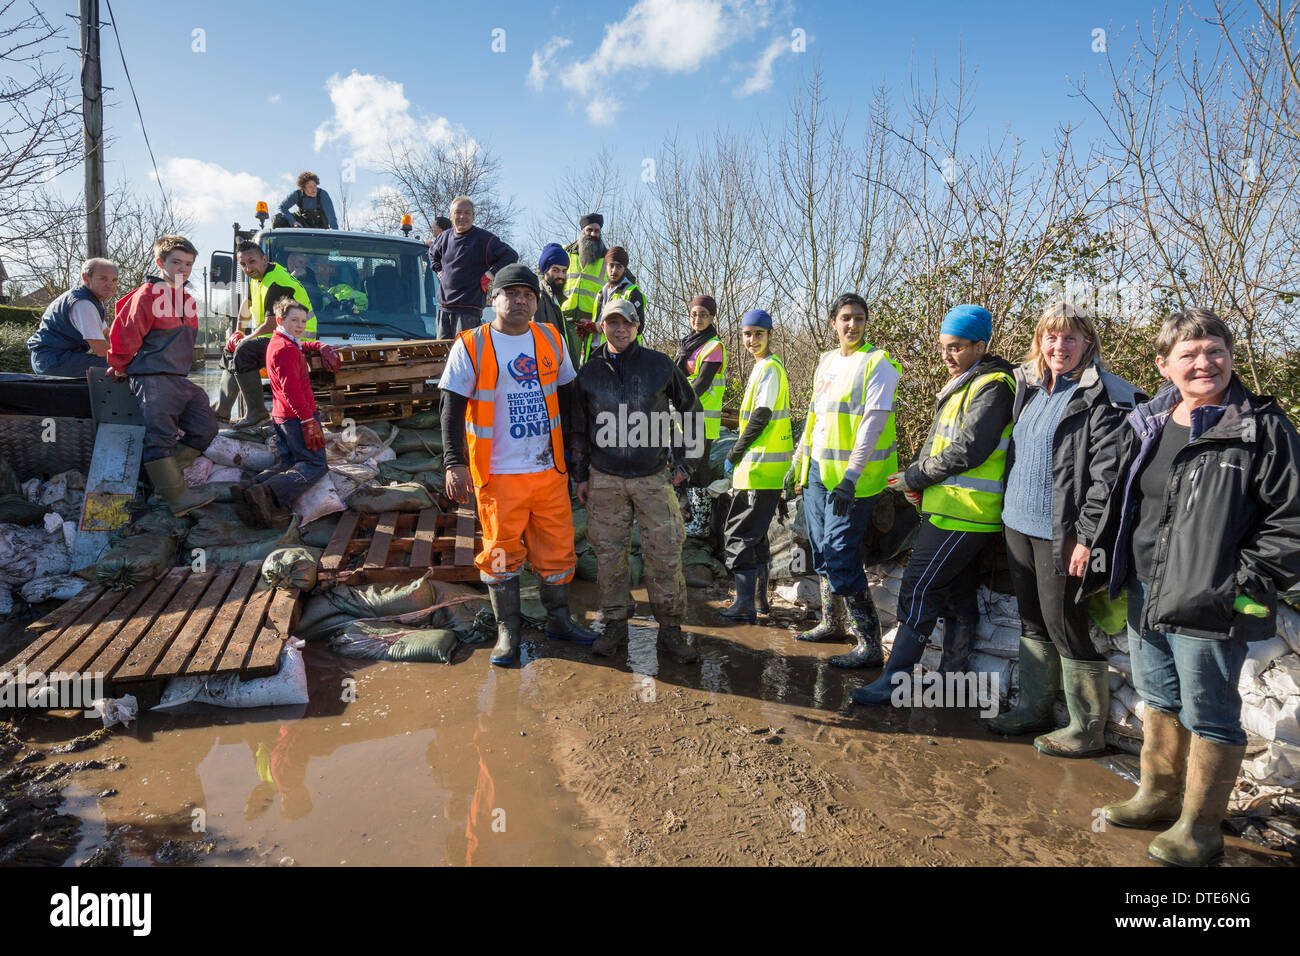 Volunteers from the Khalsa Aid meet up with staff from the Environment Agency on February 16, 2014 in the village of Moorland. They help distribute supplies of oil, water, food and sand bags to those residents who remain. The Khalsa Aid organisation is a charity run by volunteers from the Sikh community to bring humanitarian relief around the world. This is the worst flooding in Somerset since records began. Stock Photo